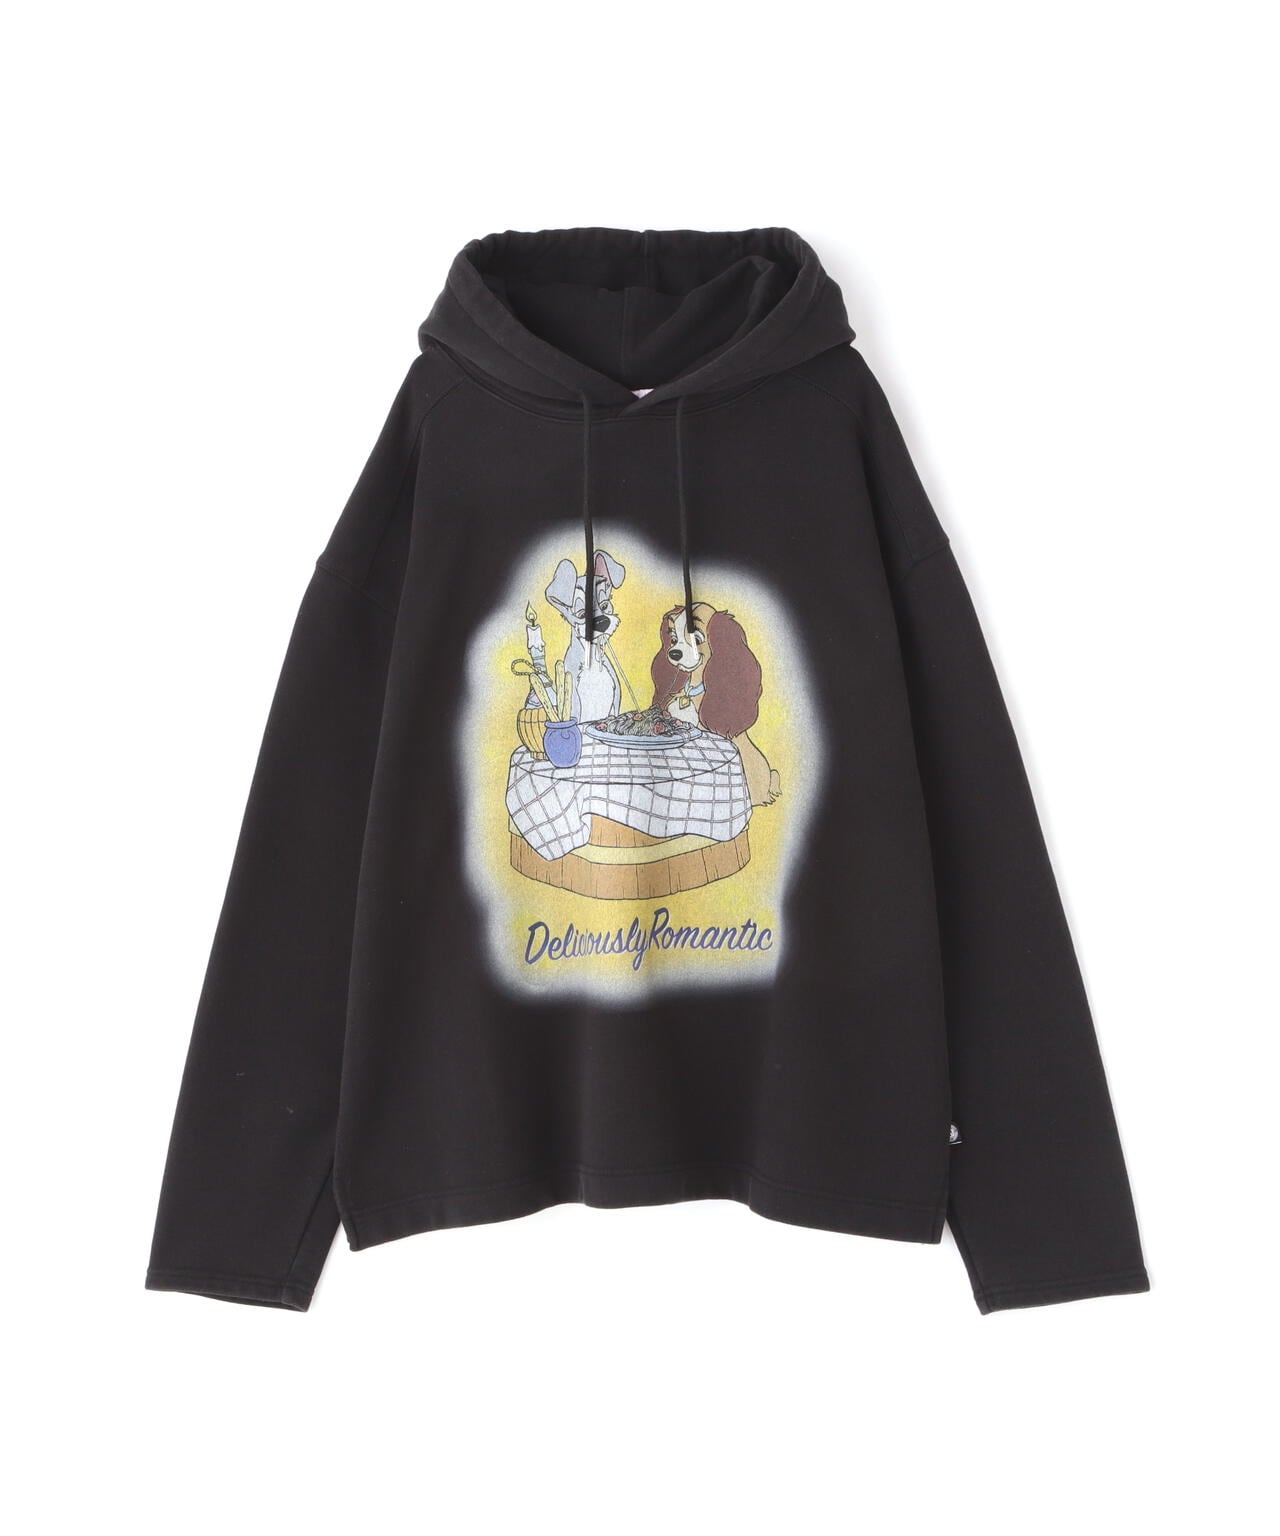 LittleSunnyBite/リトルサニーバイト/Lady and the Tramp hoodie | LHP